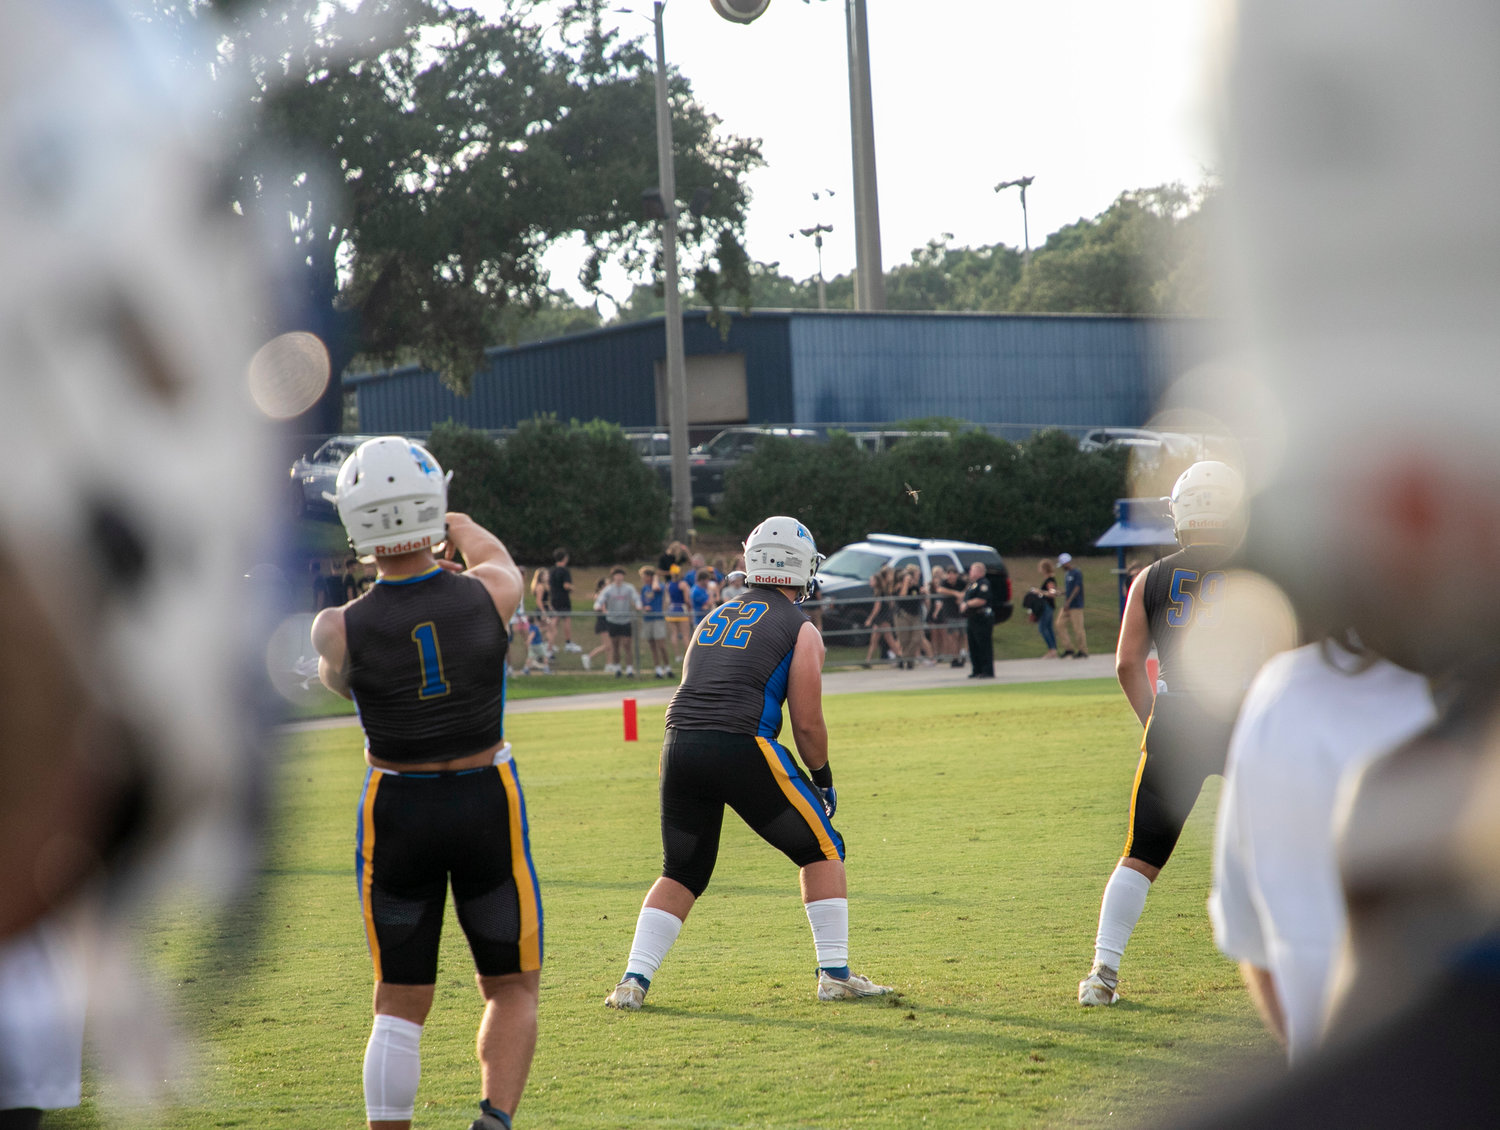 Fairhope quarterback Caden Creel (1) lifts a pass in warmups ahead of the Pirates' season-opening game against the Spanish Fort Toros Aug. 19 at home. Creel tossed a trio of touchdowns and ran for another to help Fairhope remain undefeated with a 43-39 win over Choctawhatchee.